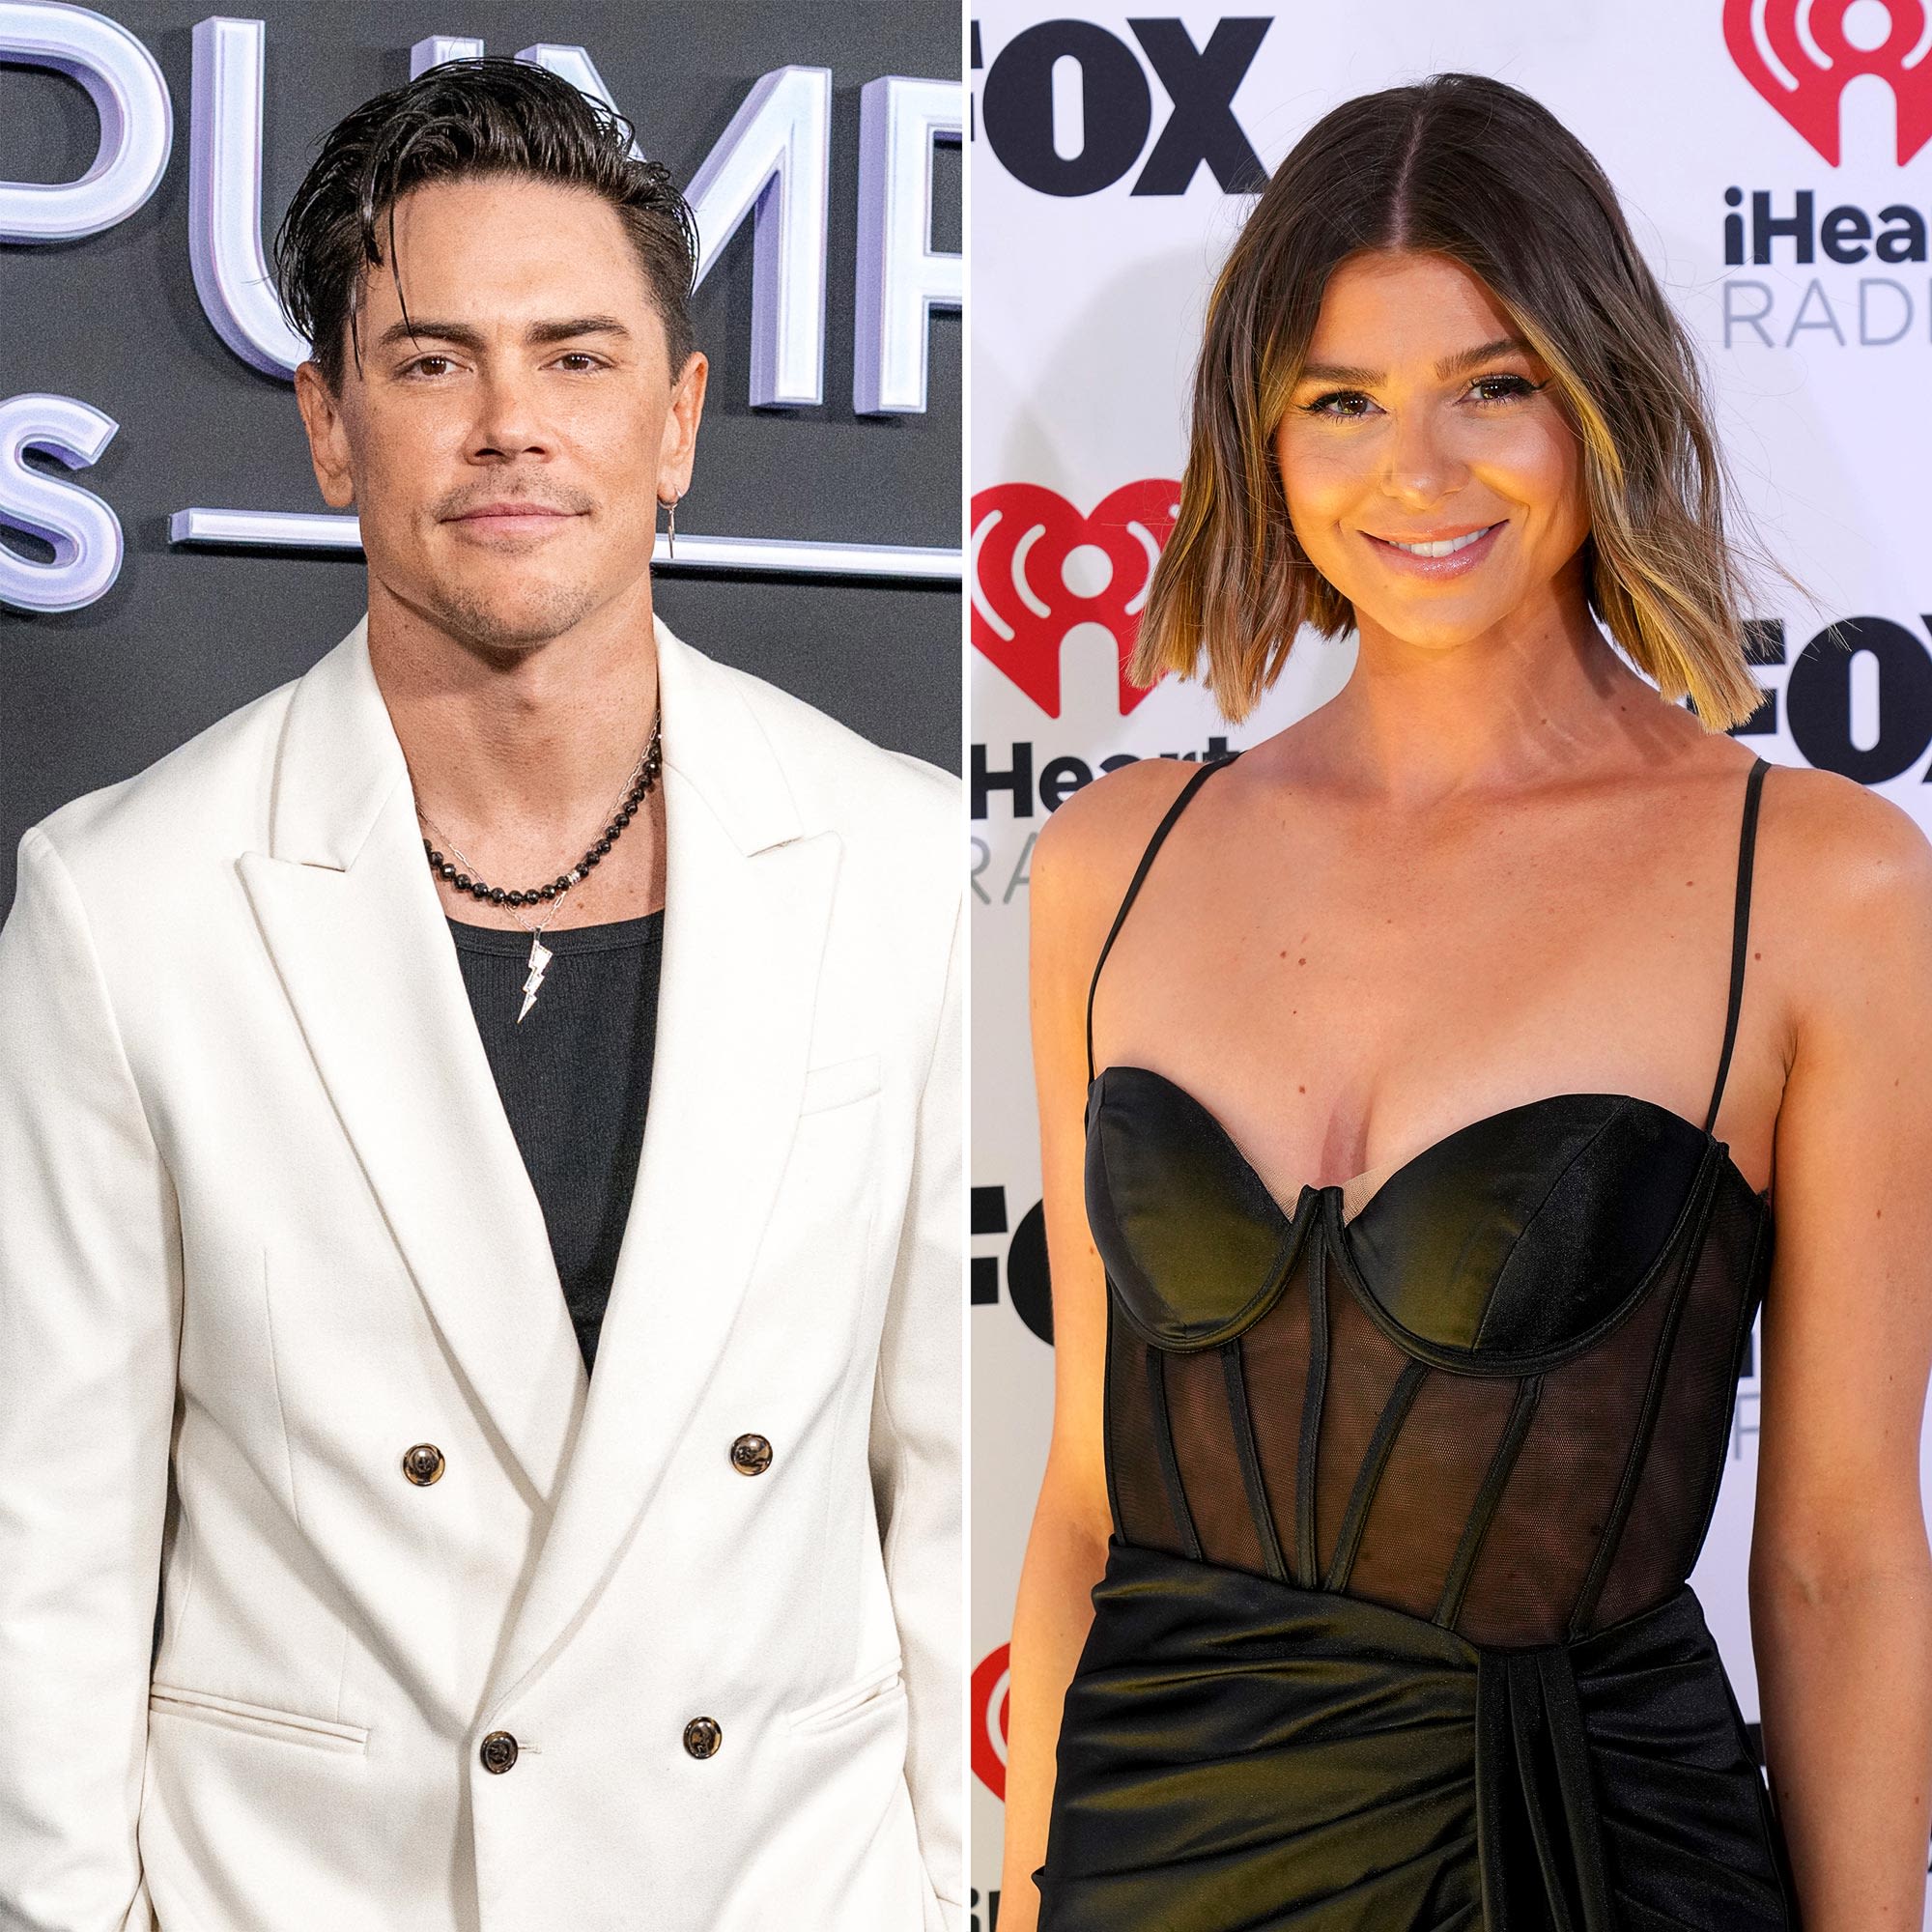 Tom Sandoval Counters Raquel Leviss’ Lawsuit, Claims Suit Aimed to ‘Bend the Narrative’